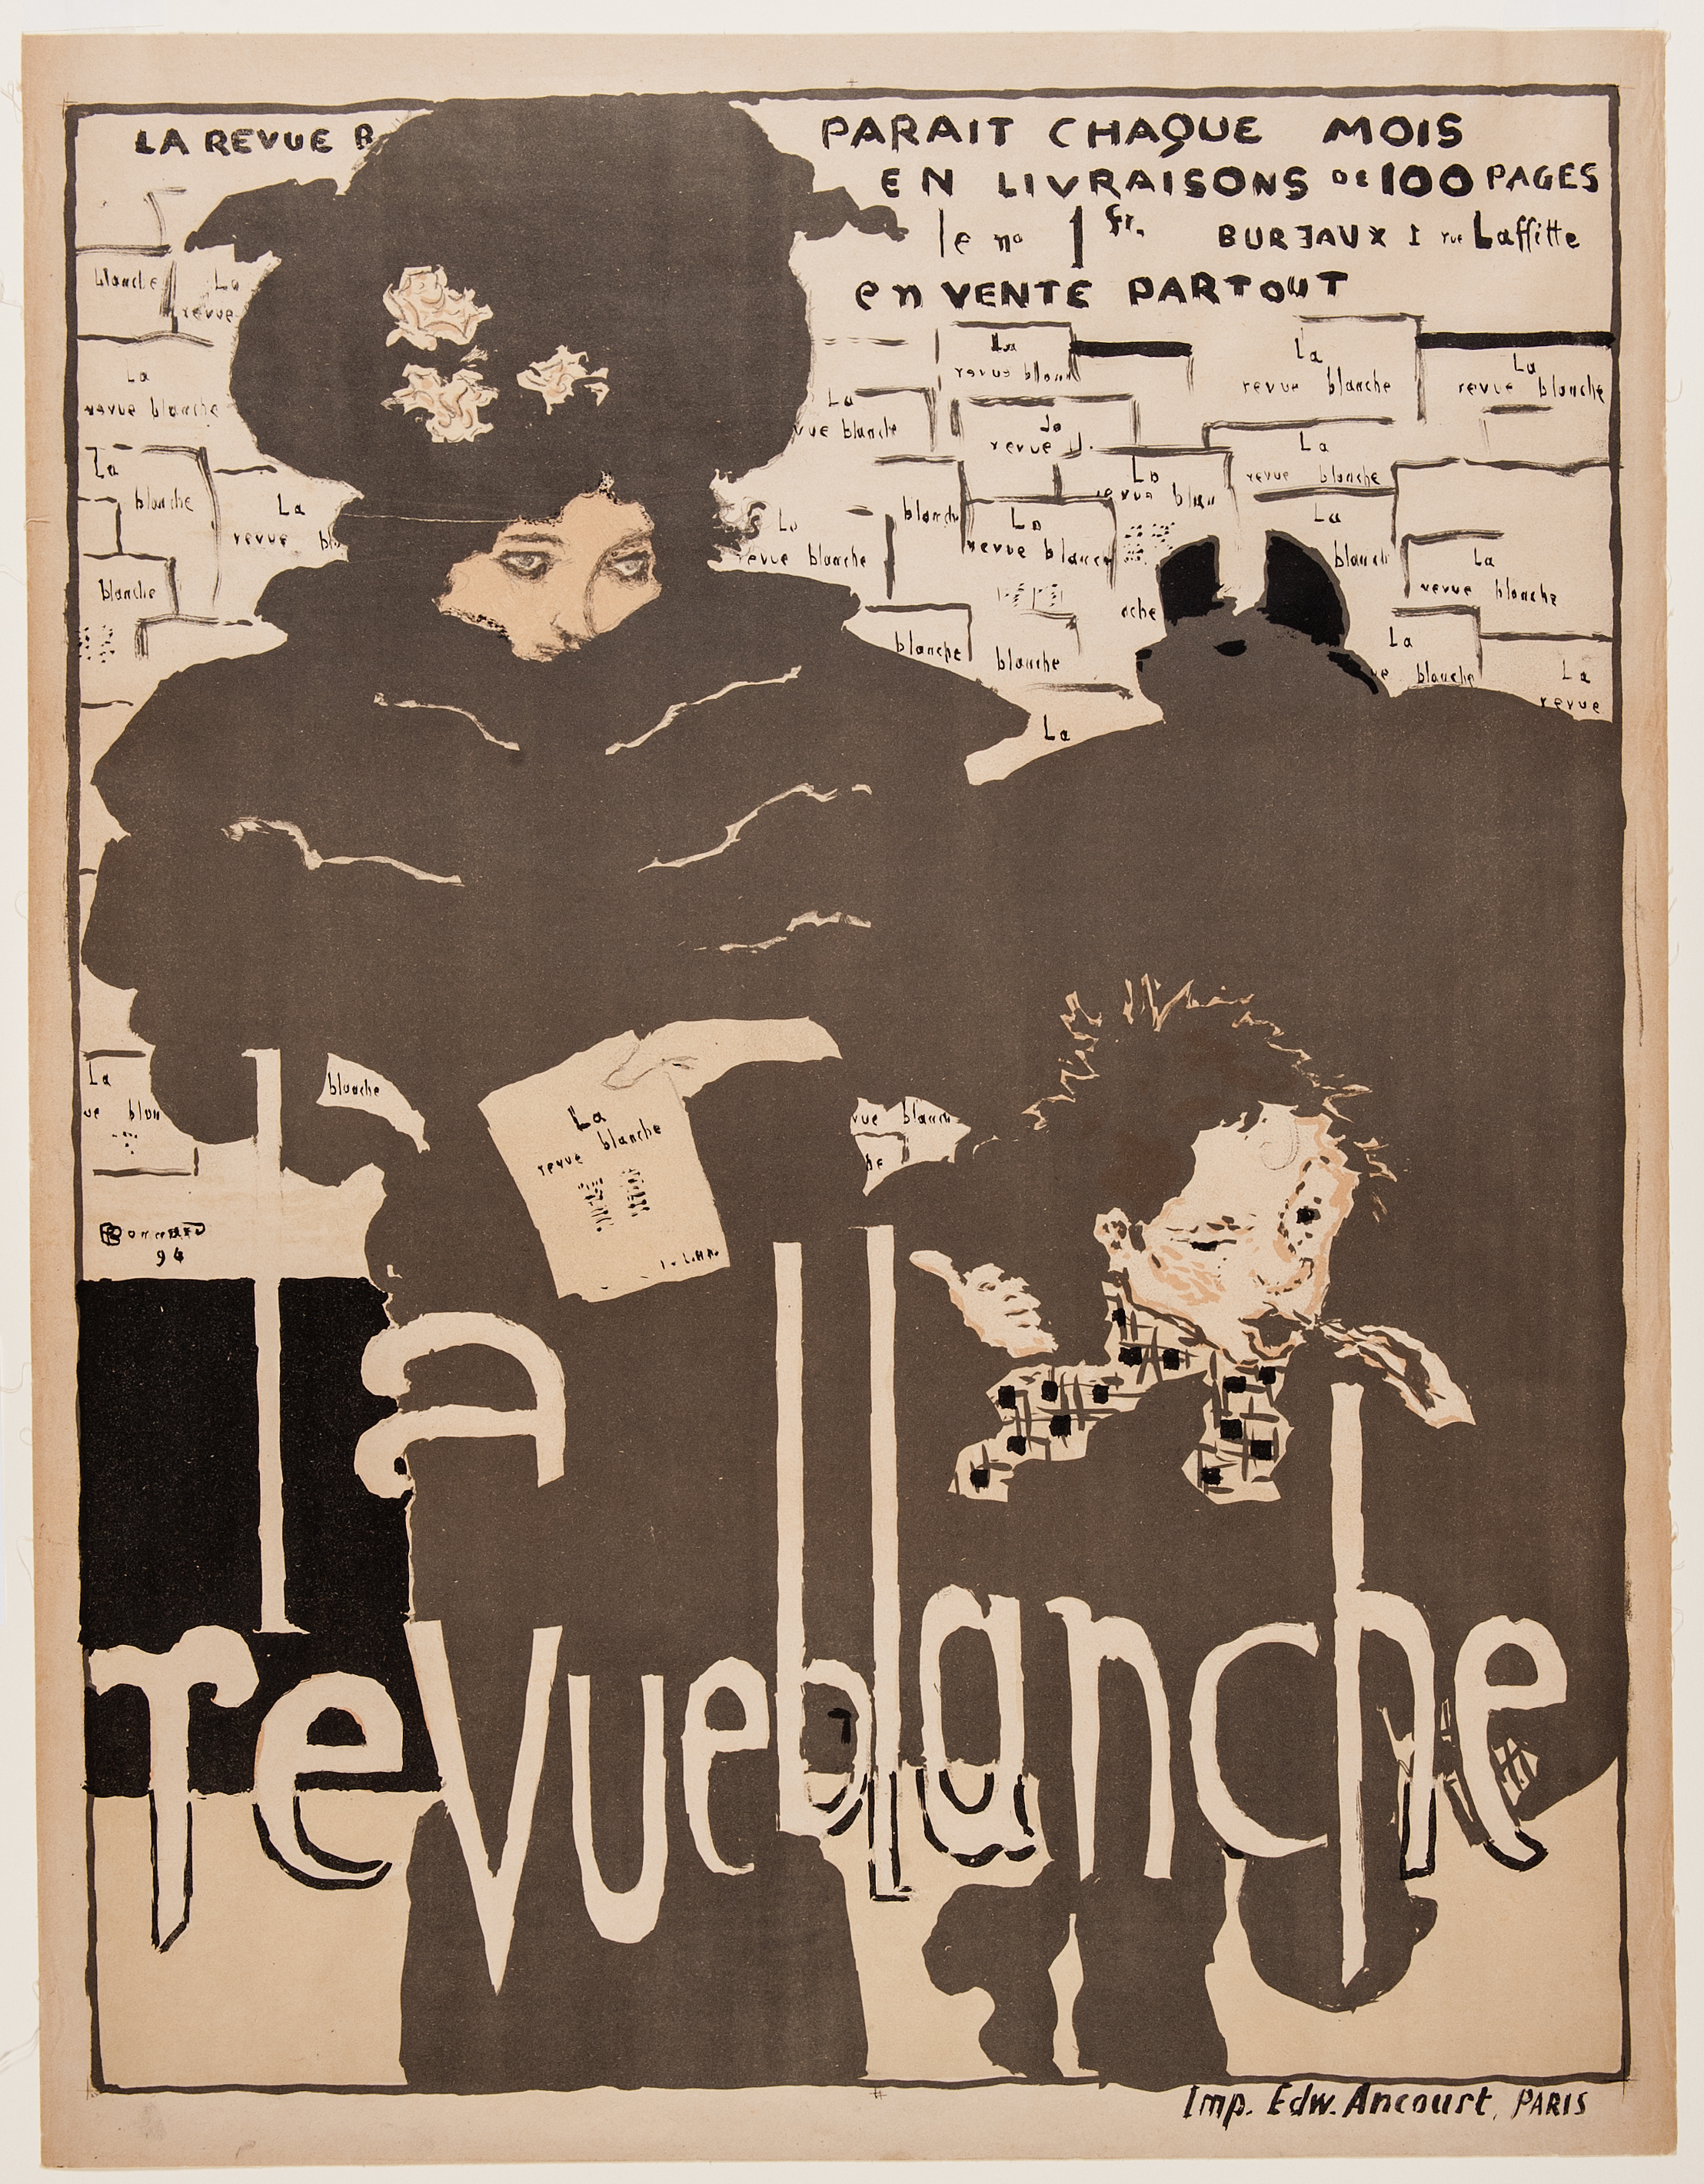 This poster depicts a standing female figure in a fancy hat and cape on the left with the smaller, male figure with checked tie points on the right, and a shadowy form in the background. The words 'la revue blanche' appear across the lower third of the composition. Many copies of 'la revue blanche' are pasted on the wall behind the figures.